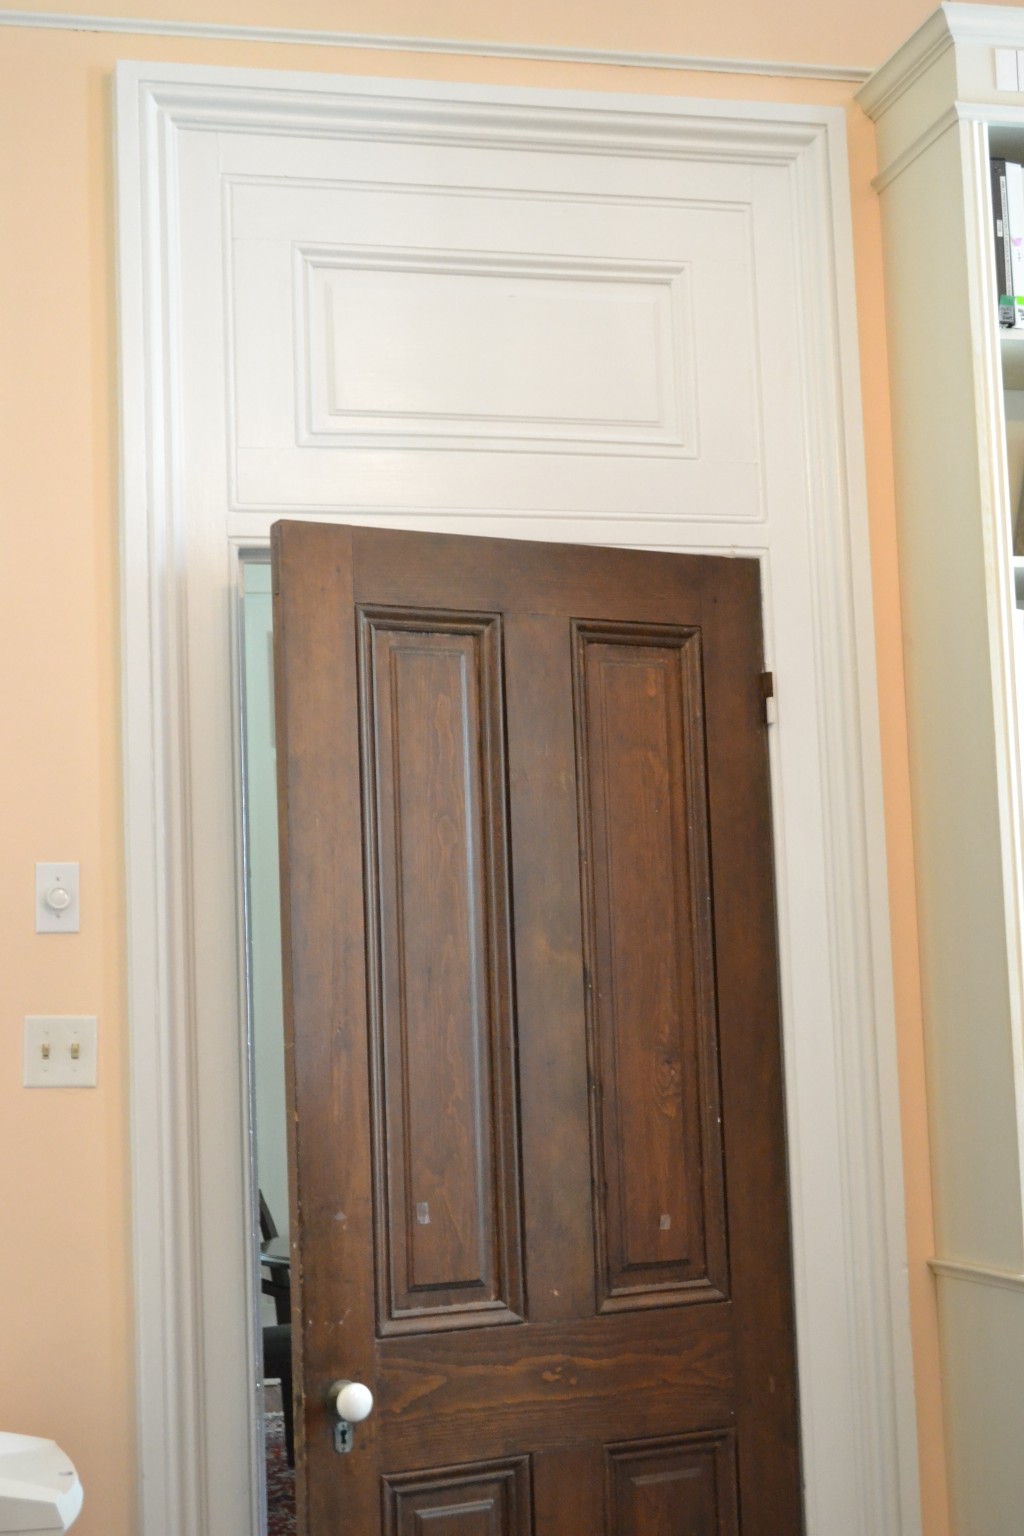 Beautifully paneled, solid wood doors throughout the interior. I love the transom detailing above.